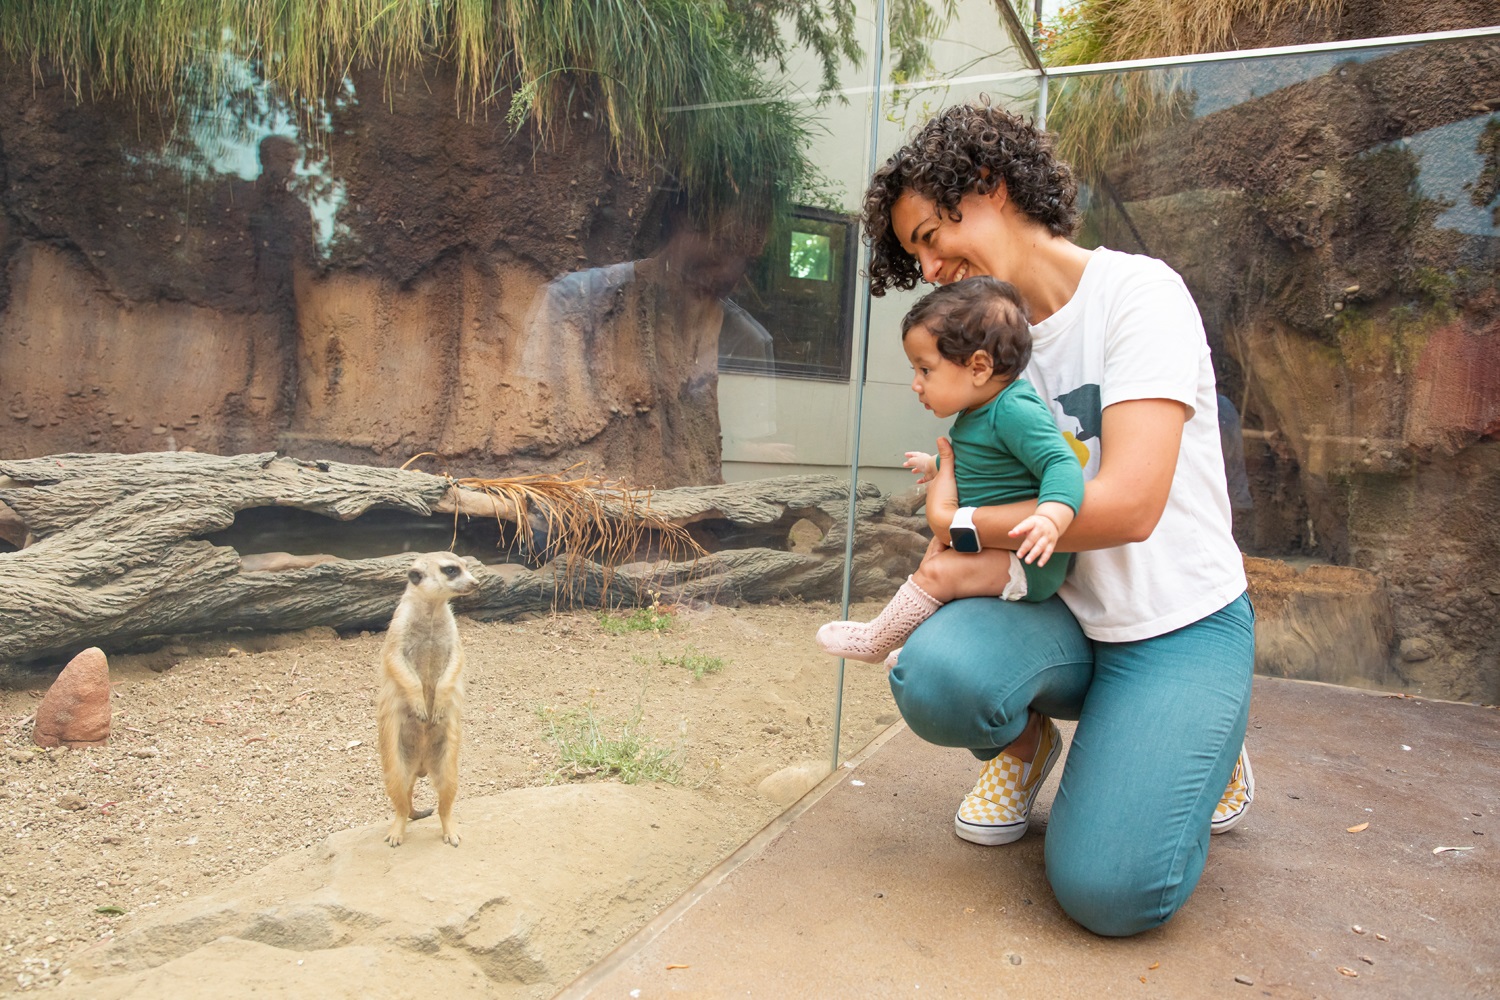 A mom kneels in front of the Meerkat exhibit holding her baby, who makes eye contact with an excited Meerkat